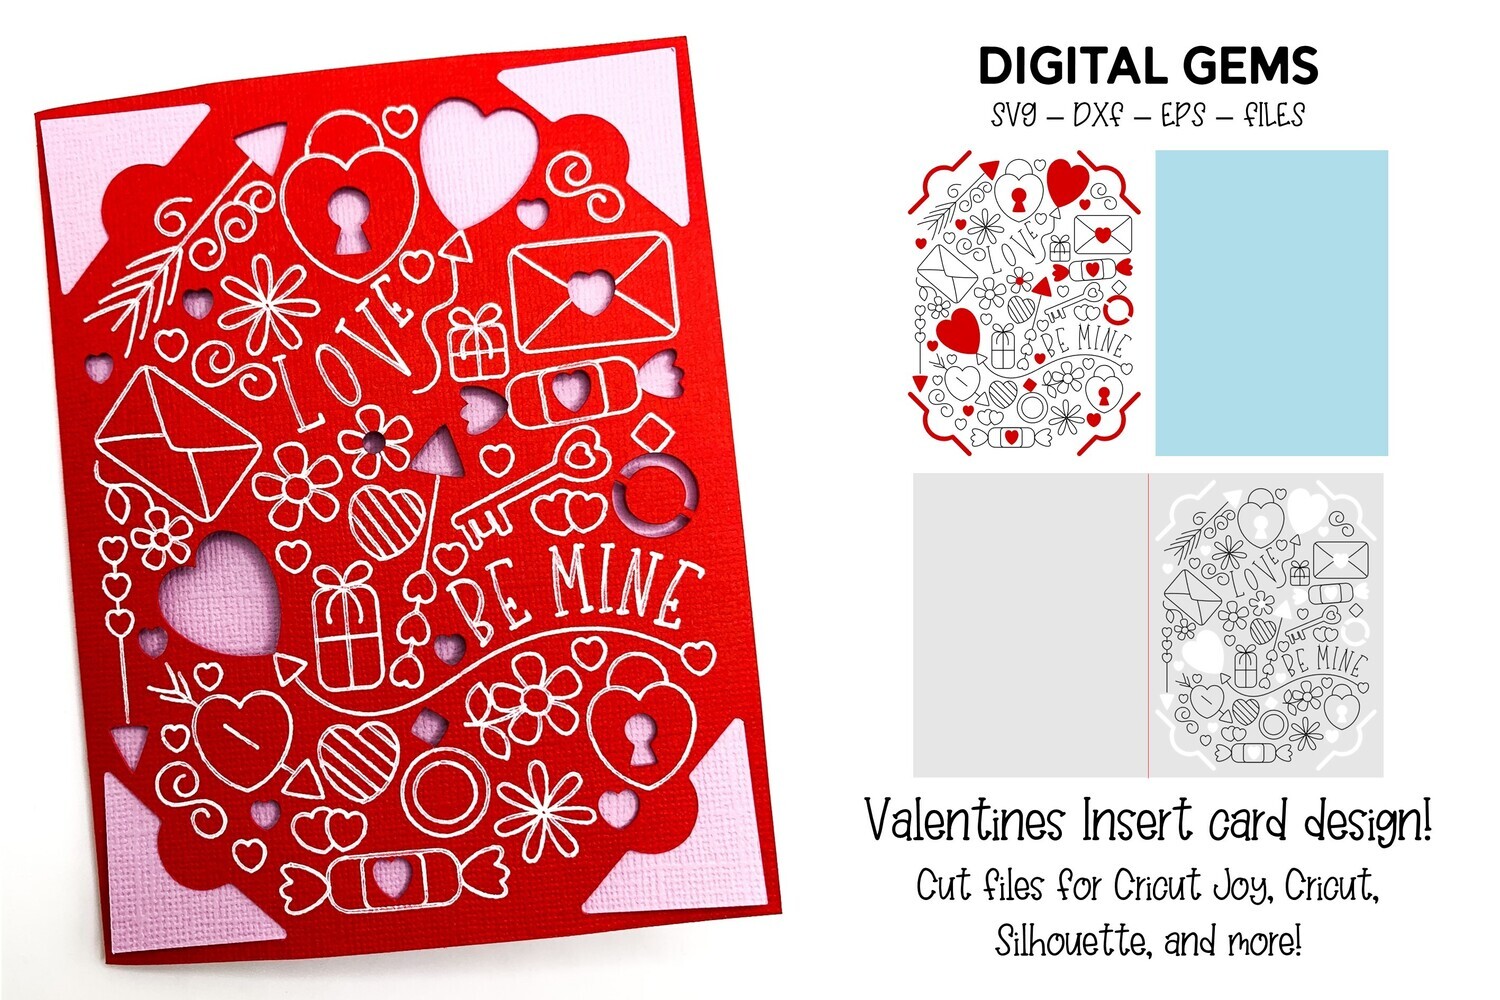 SVG: Valentines Day Insert Card. Cricut Joy Friendly. Draw and Cut Card  Design. Envelope Template Included. Cricut Joy Valentines Card SVG 